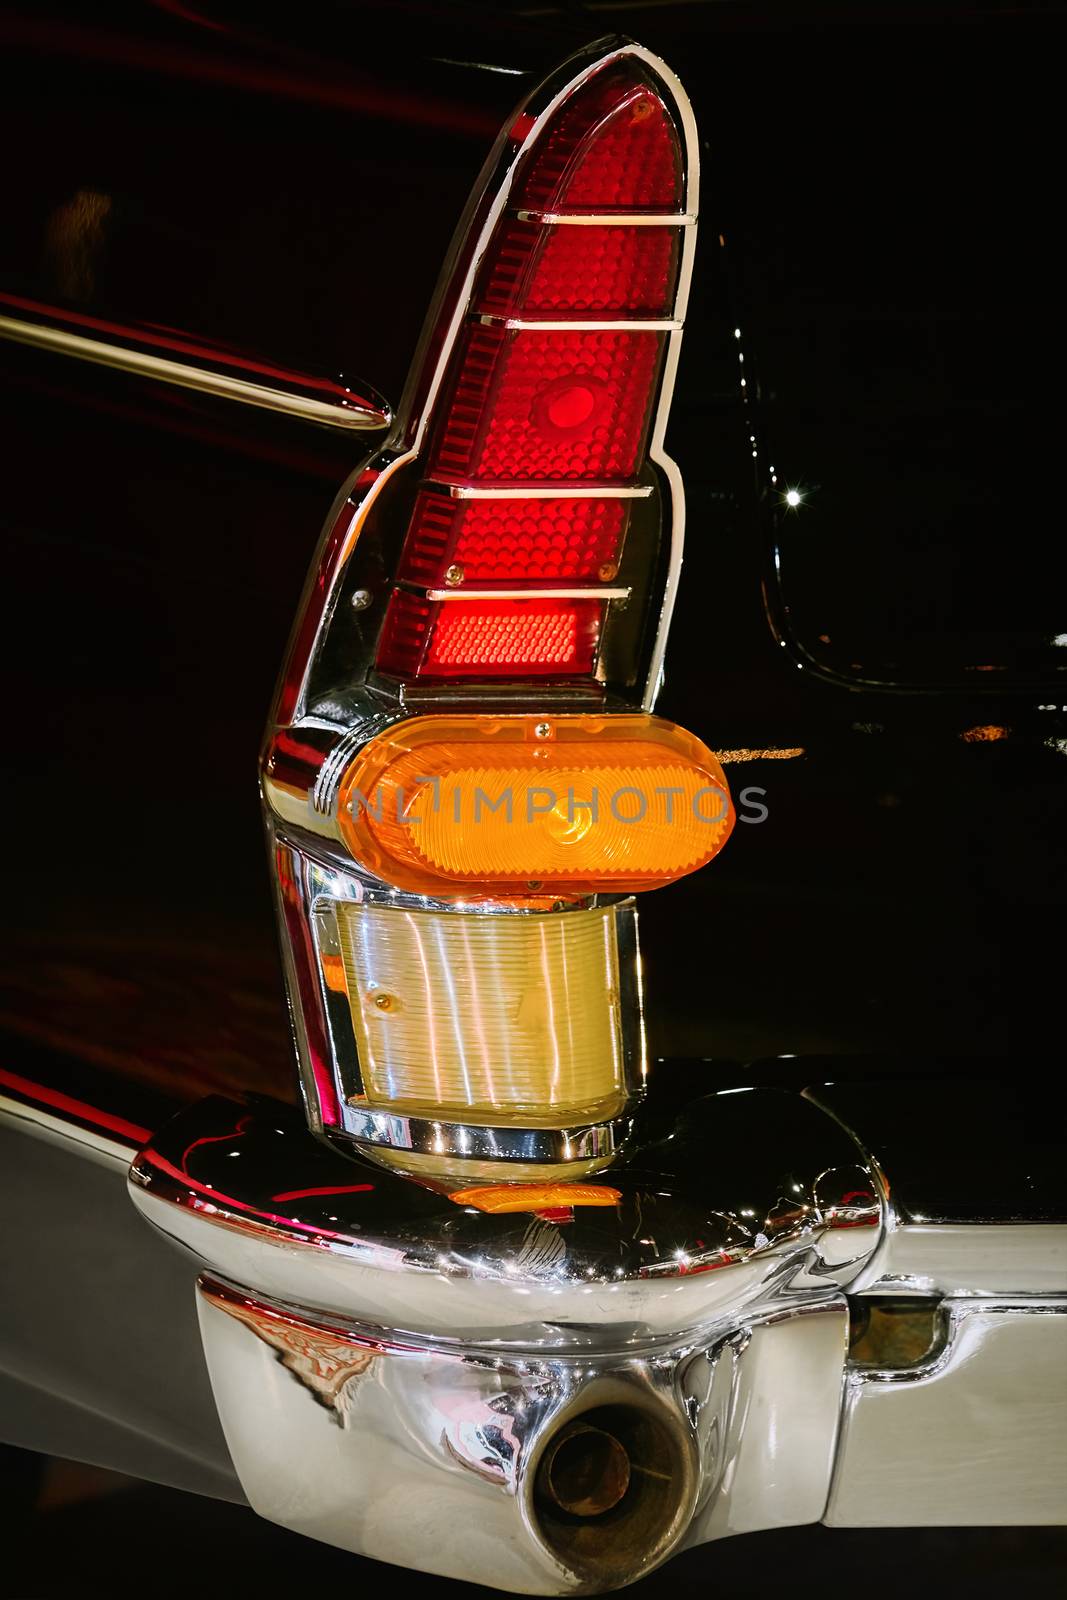 Back Lamp of Old Car by SNR